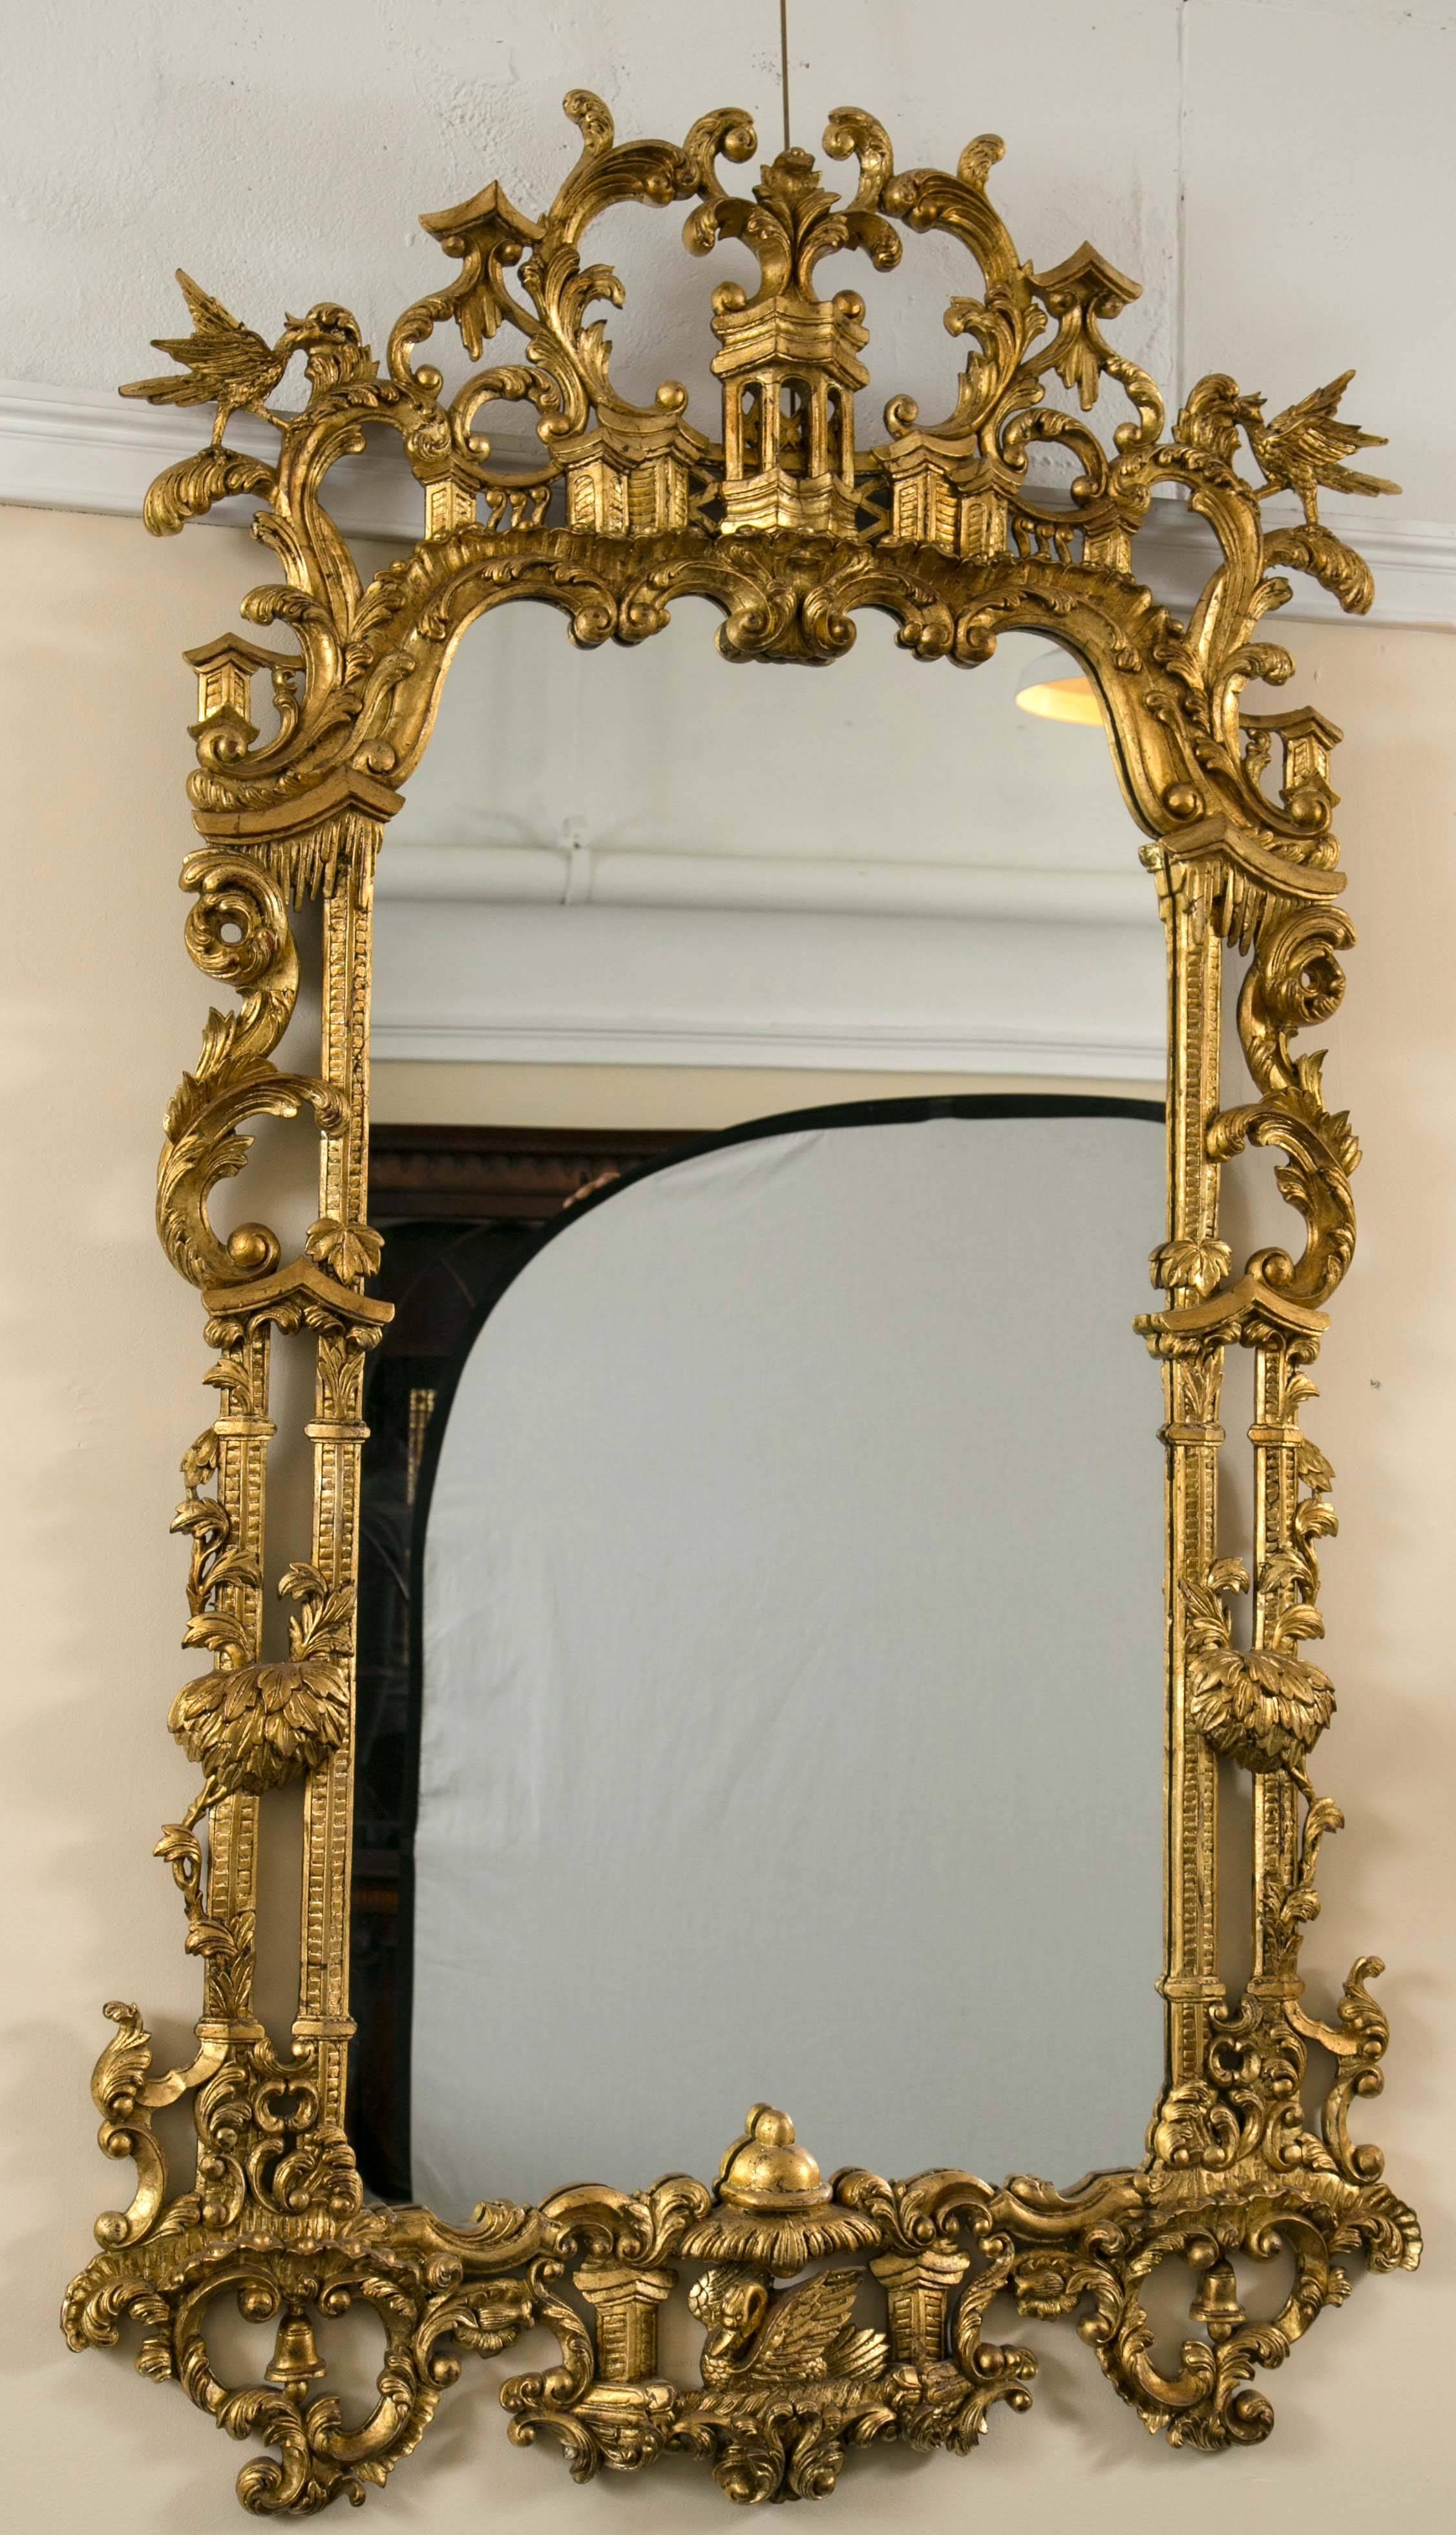 Pair of monumental gilt gold carved Chippendale style wall or console mirrors. The clear clean center mirror framed in a magnificently carved gilt wooden frame adorning Pagoda with leaves and foliage. The bottom of this finely worked frame having a